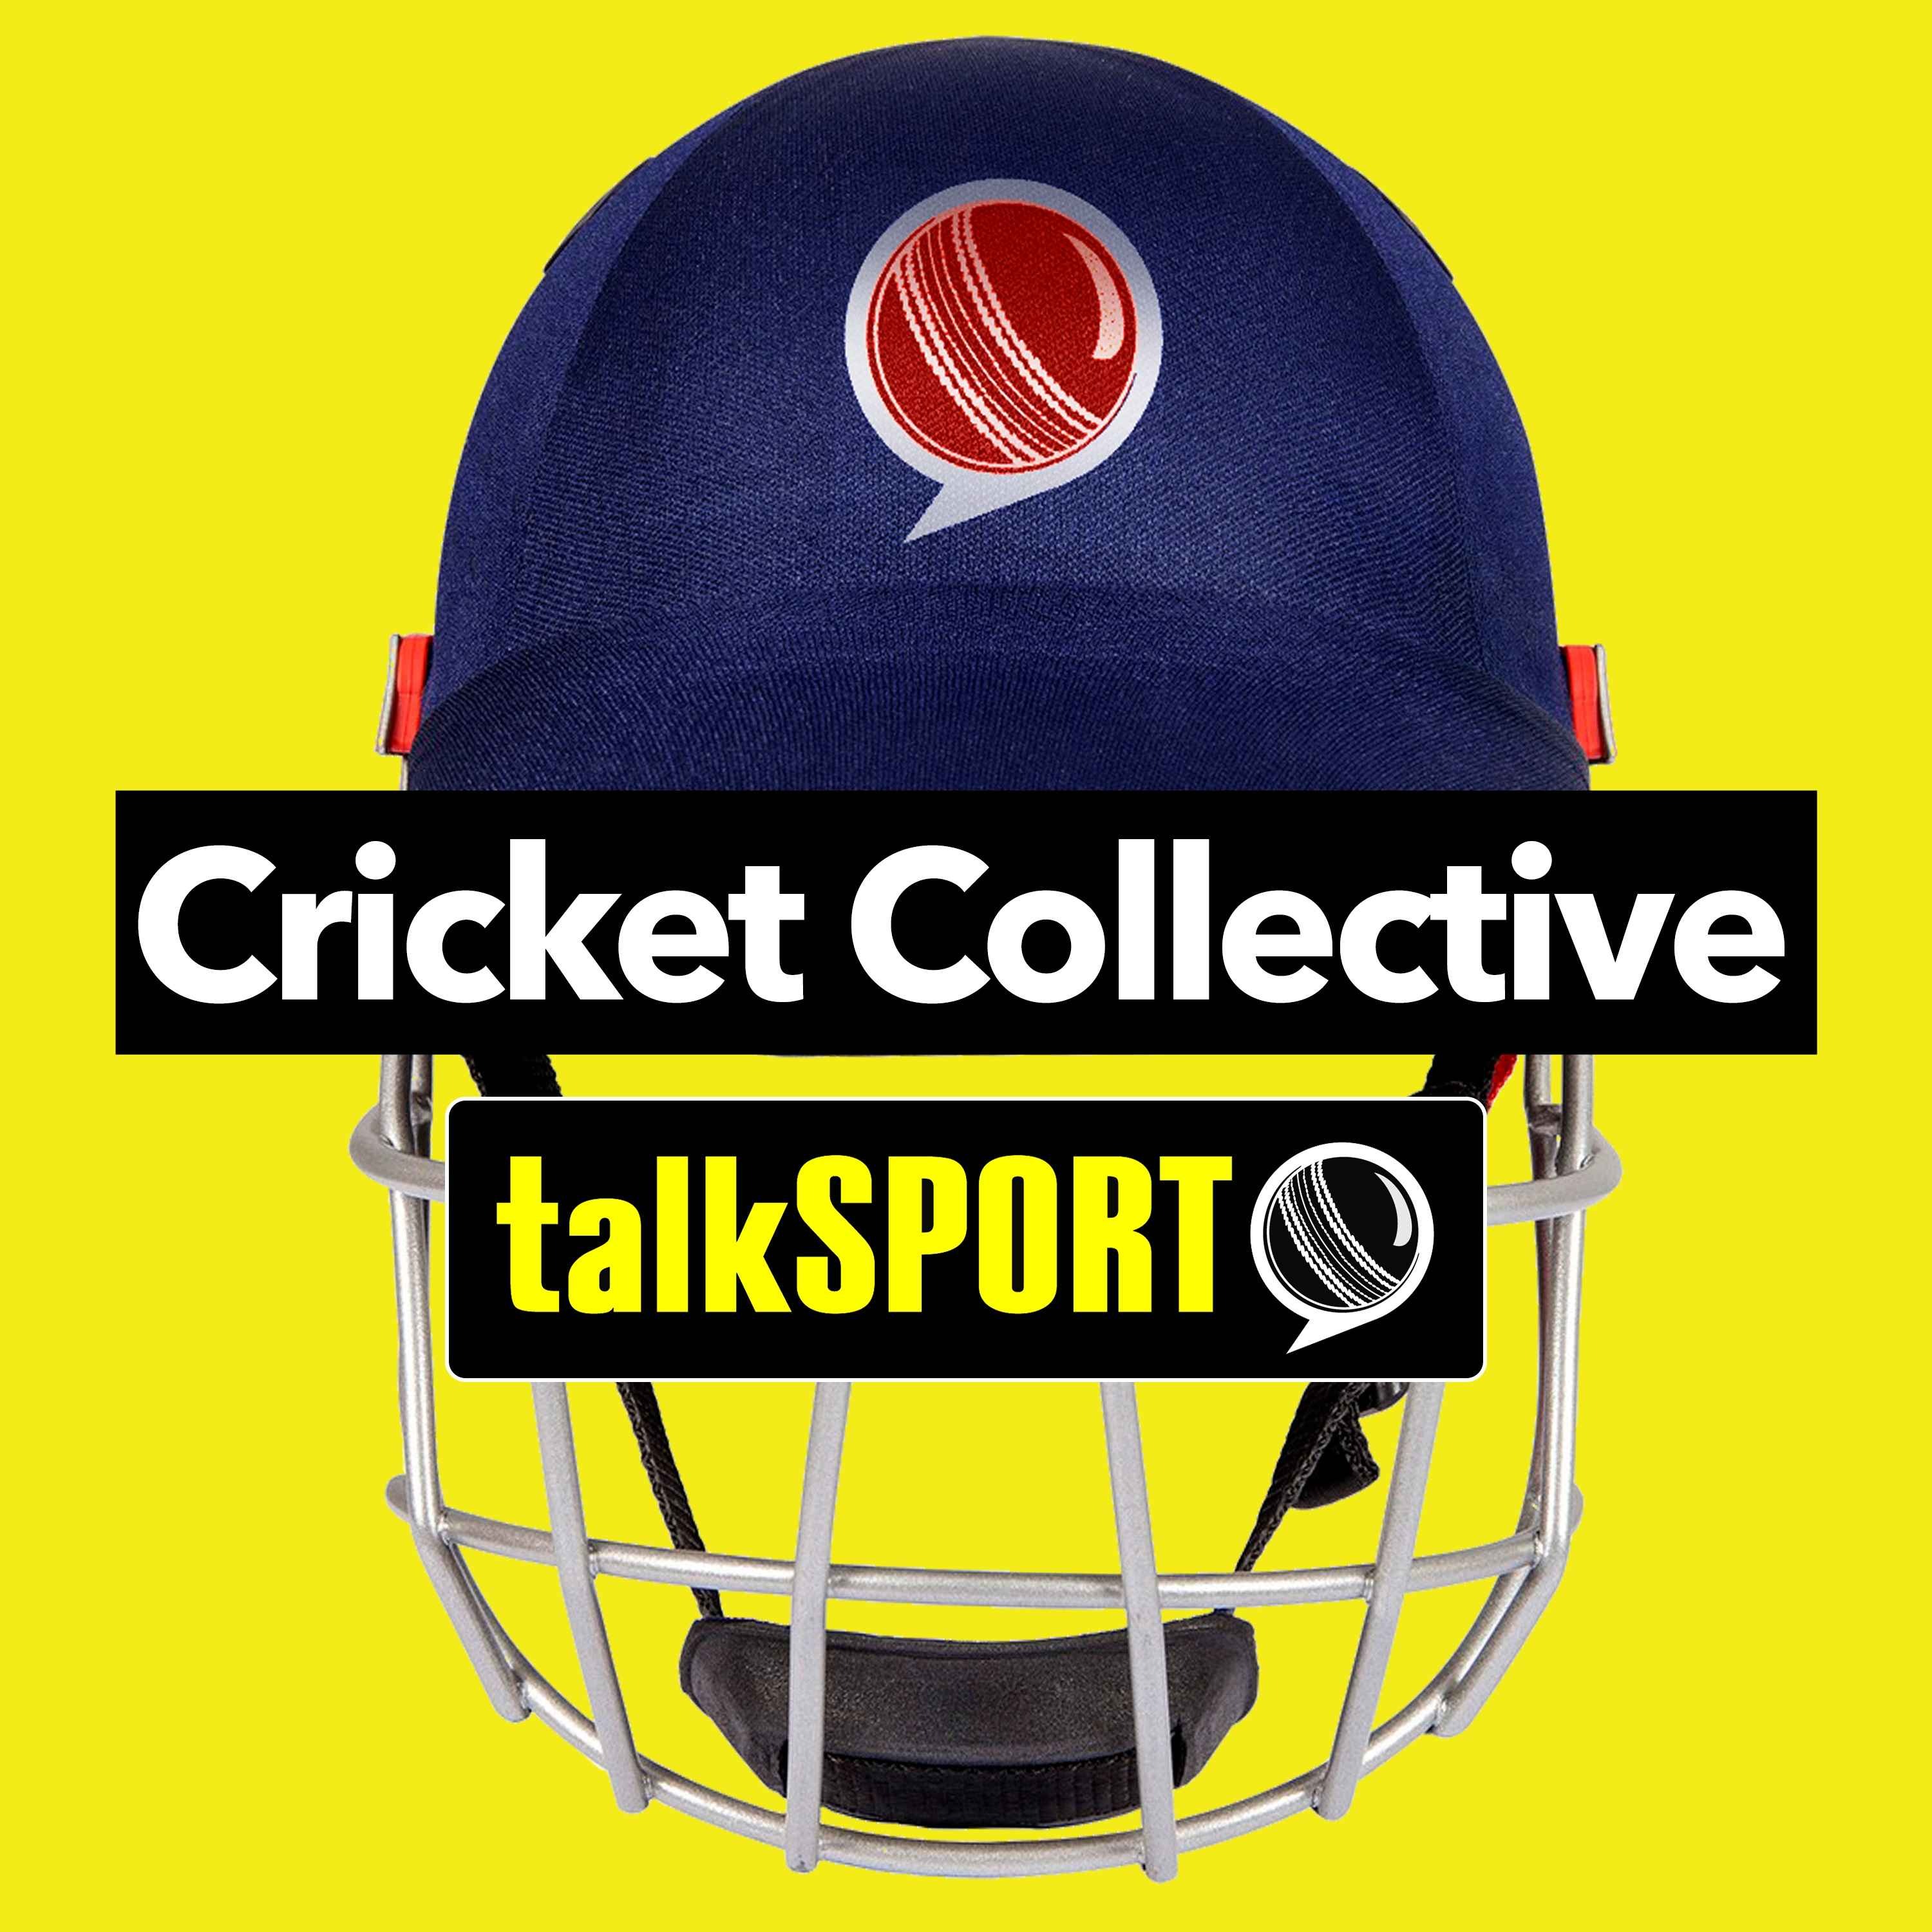 The Cricket Collective - Stuart Broad Exclusive & Test Cricket Is Back!